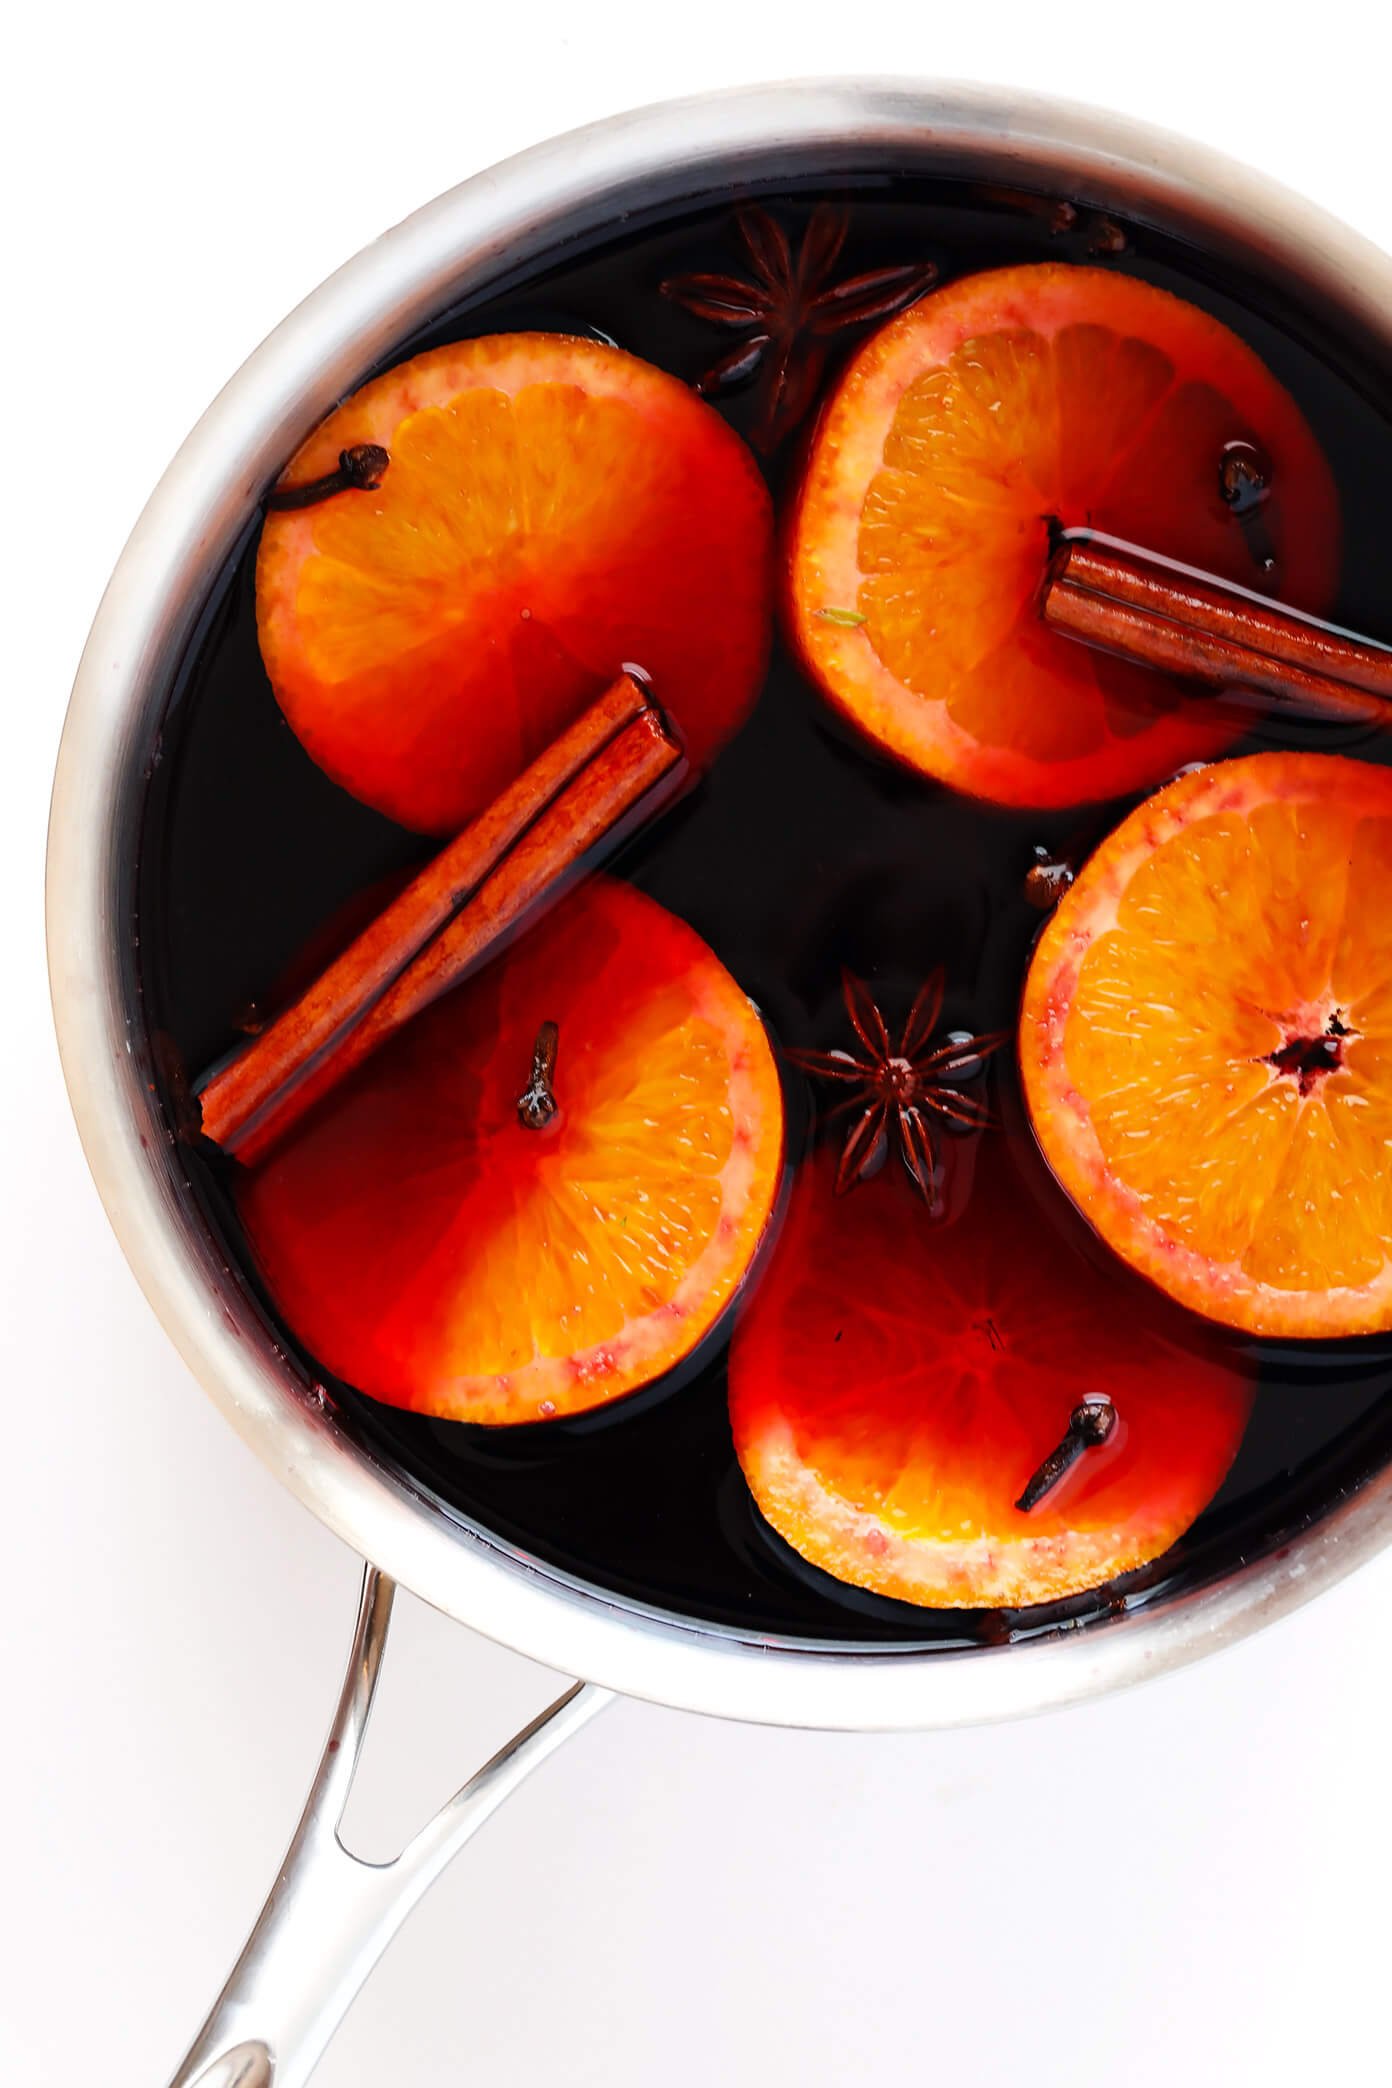 How To Make Mulled Wine in Saucepan